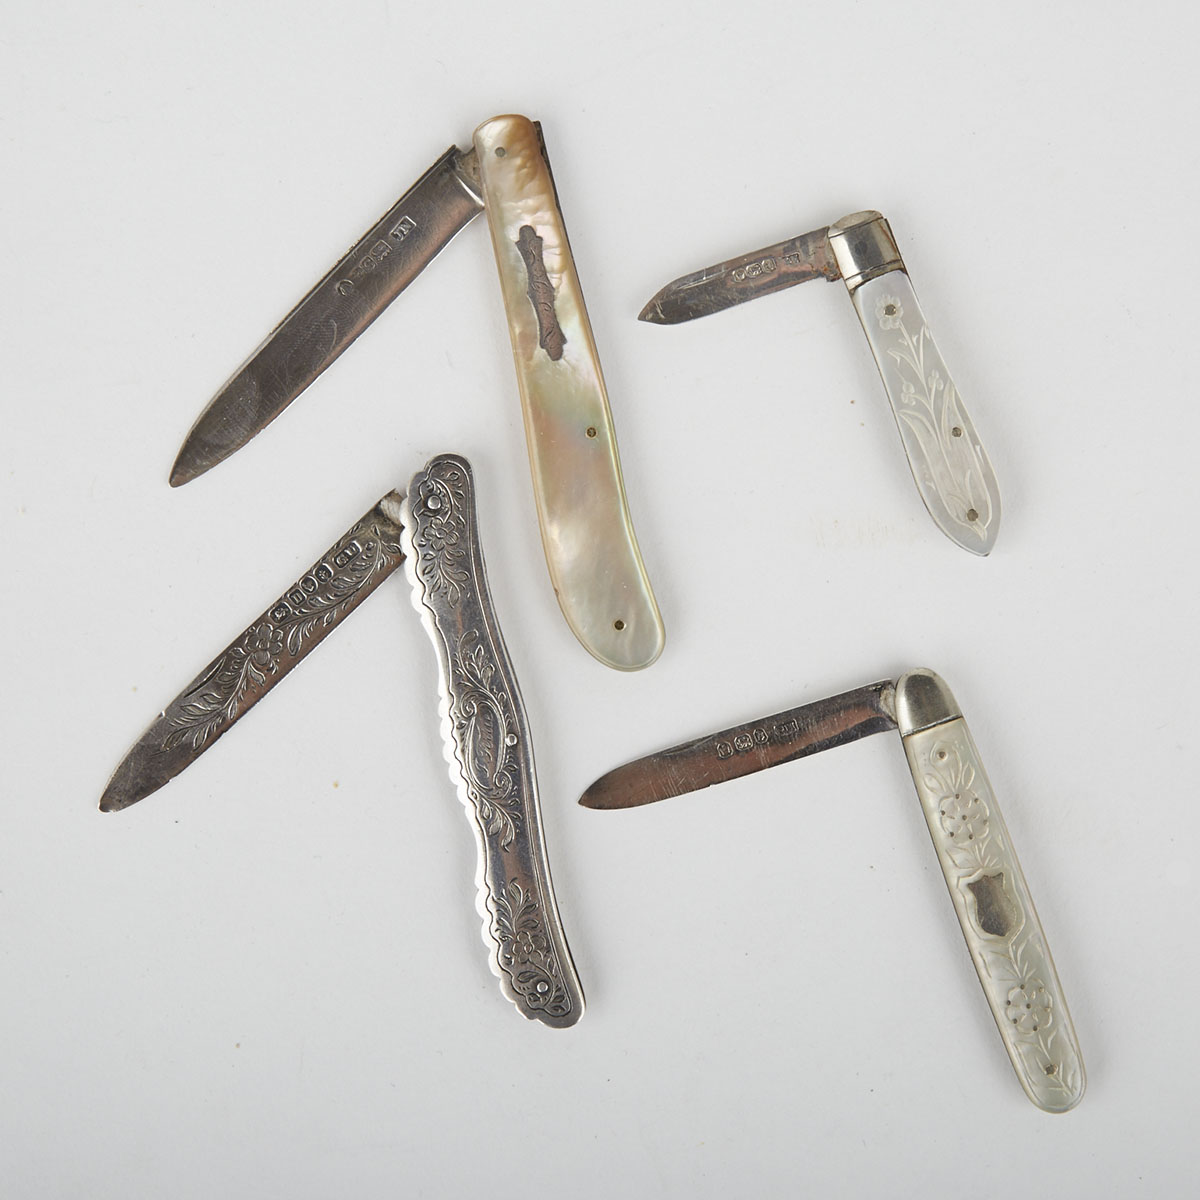 Four Victorian and Later Silver Pocket Knives, various makers, Birmingham and Sheffield, c.1838-1928